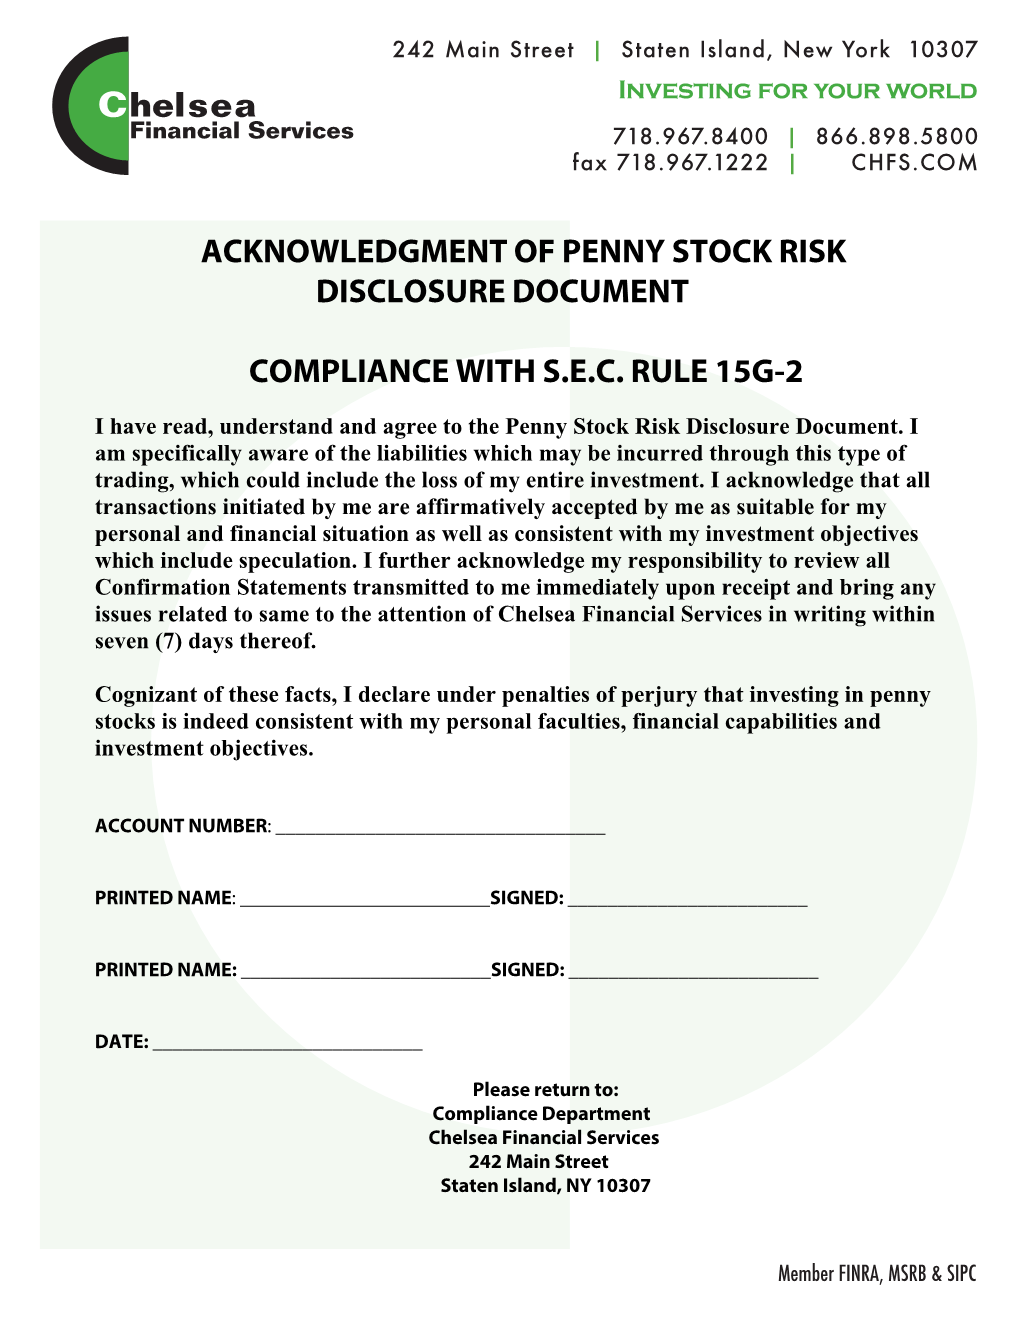 Penny Stock Risk Disclosure Document